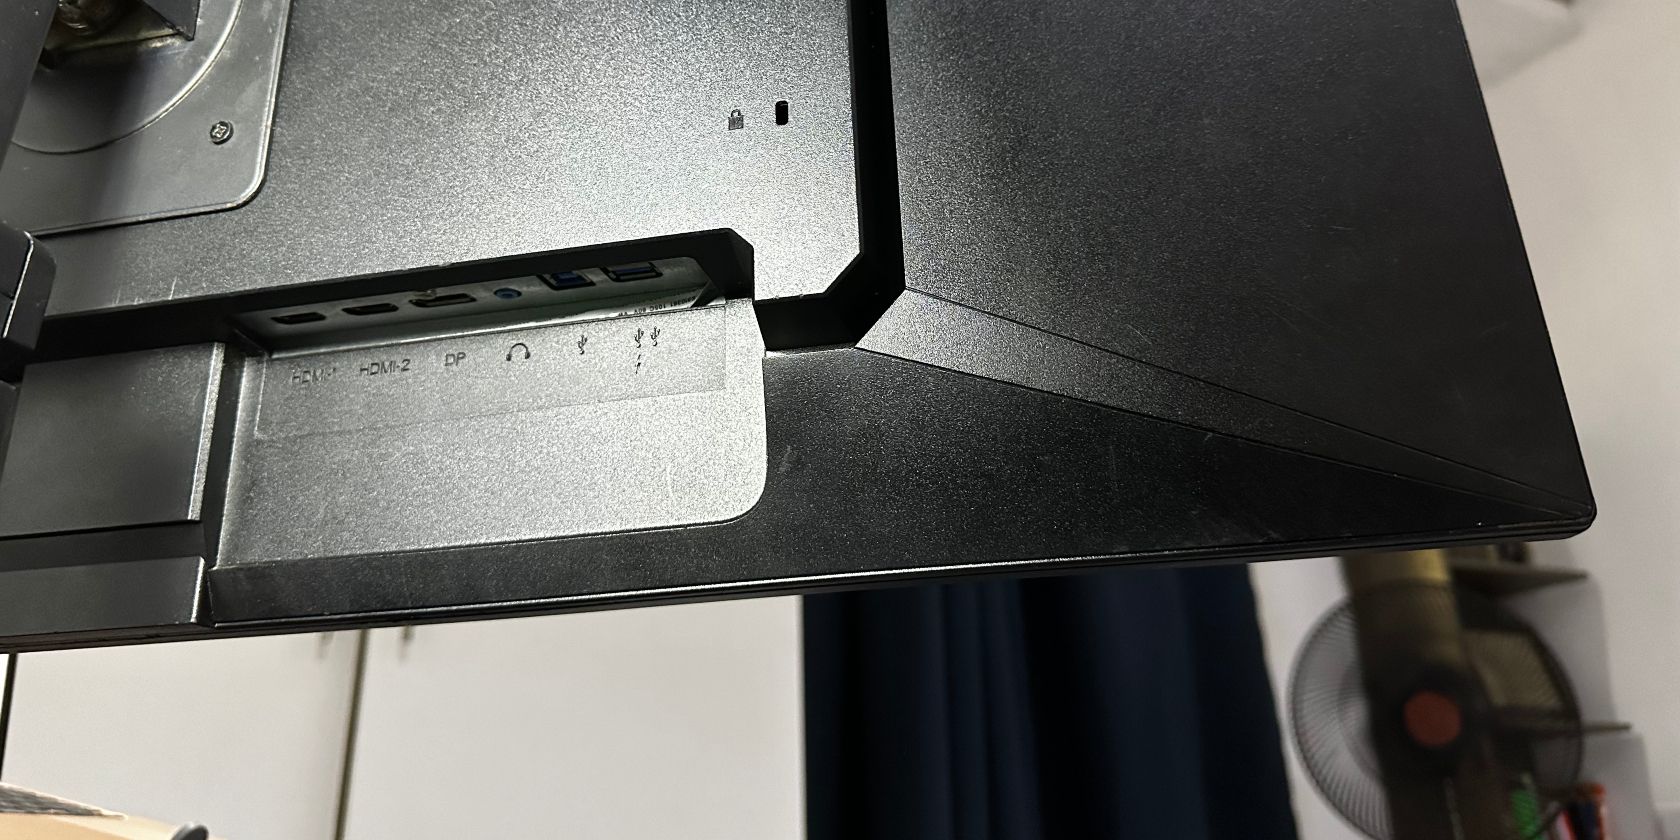 Back of monitor displaying connectivity ports